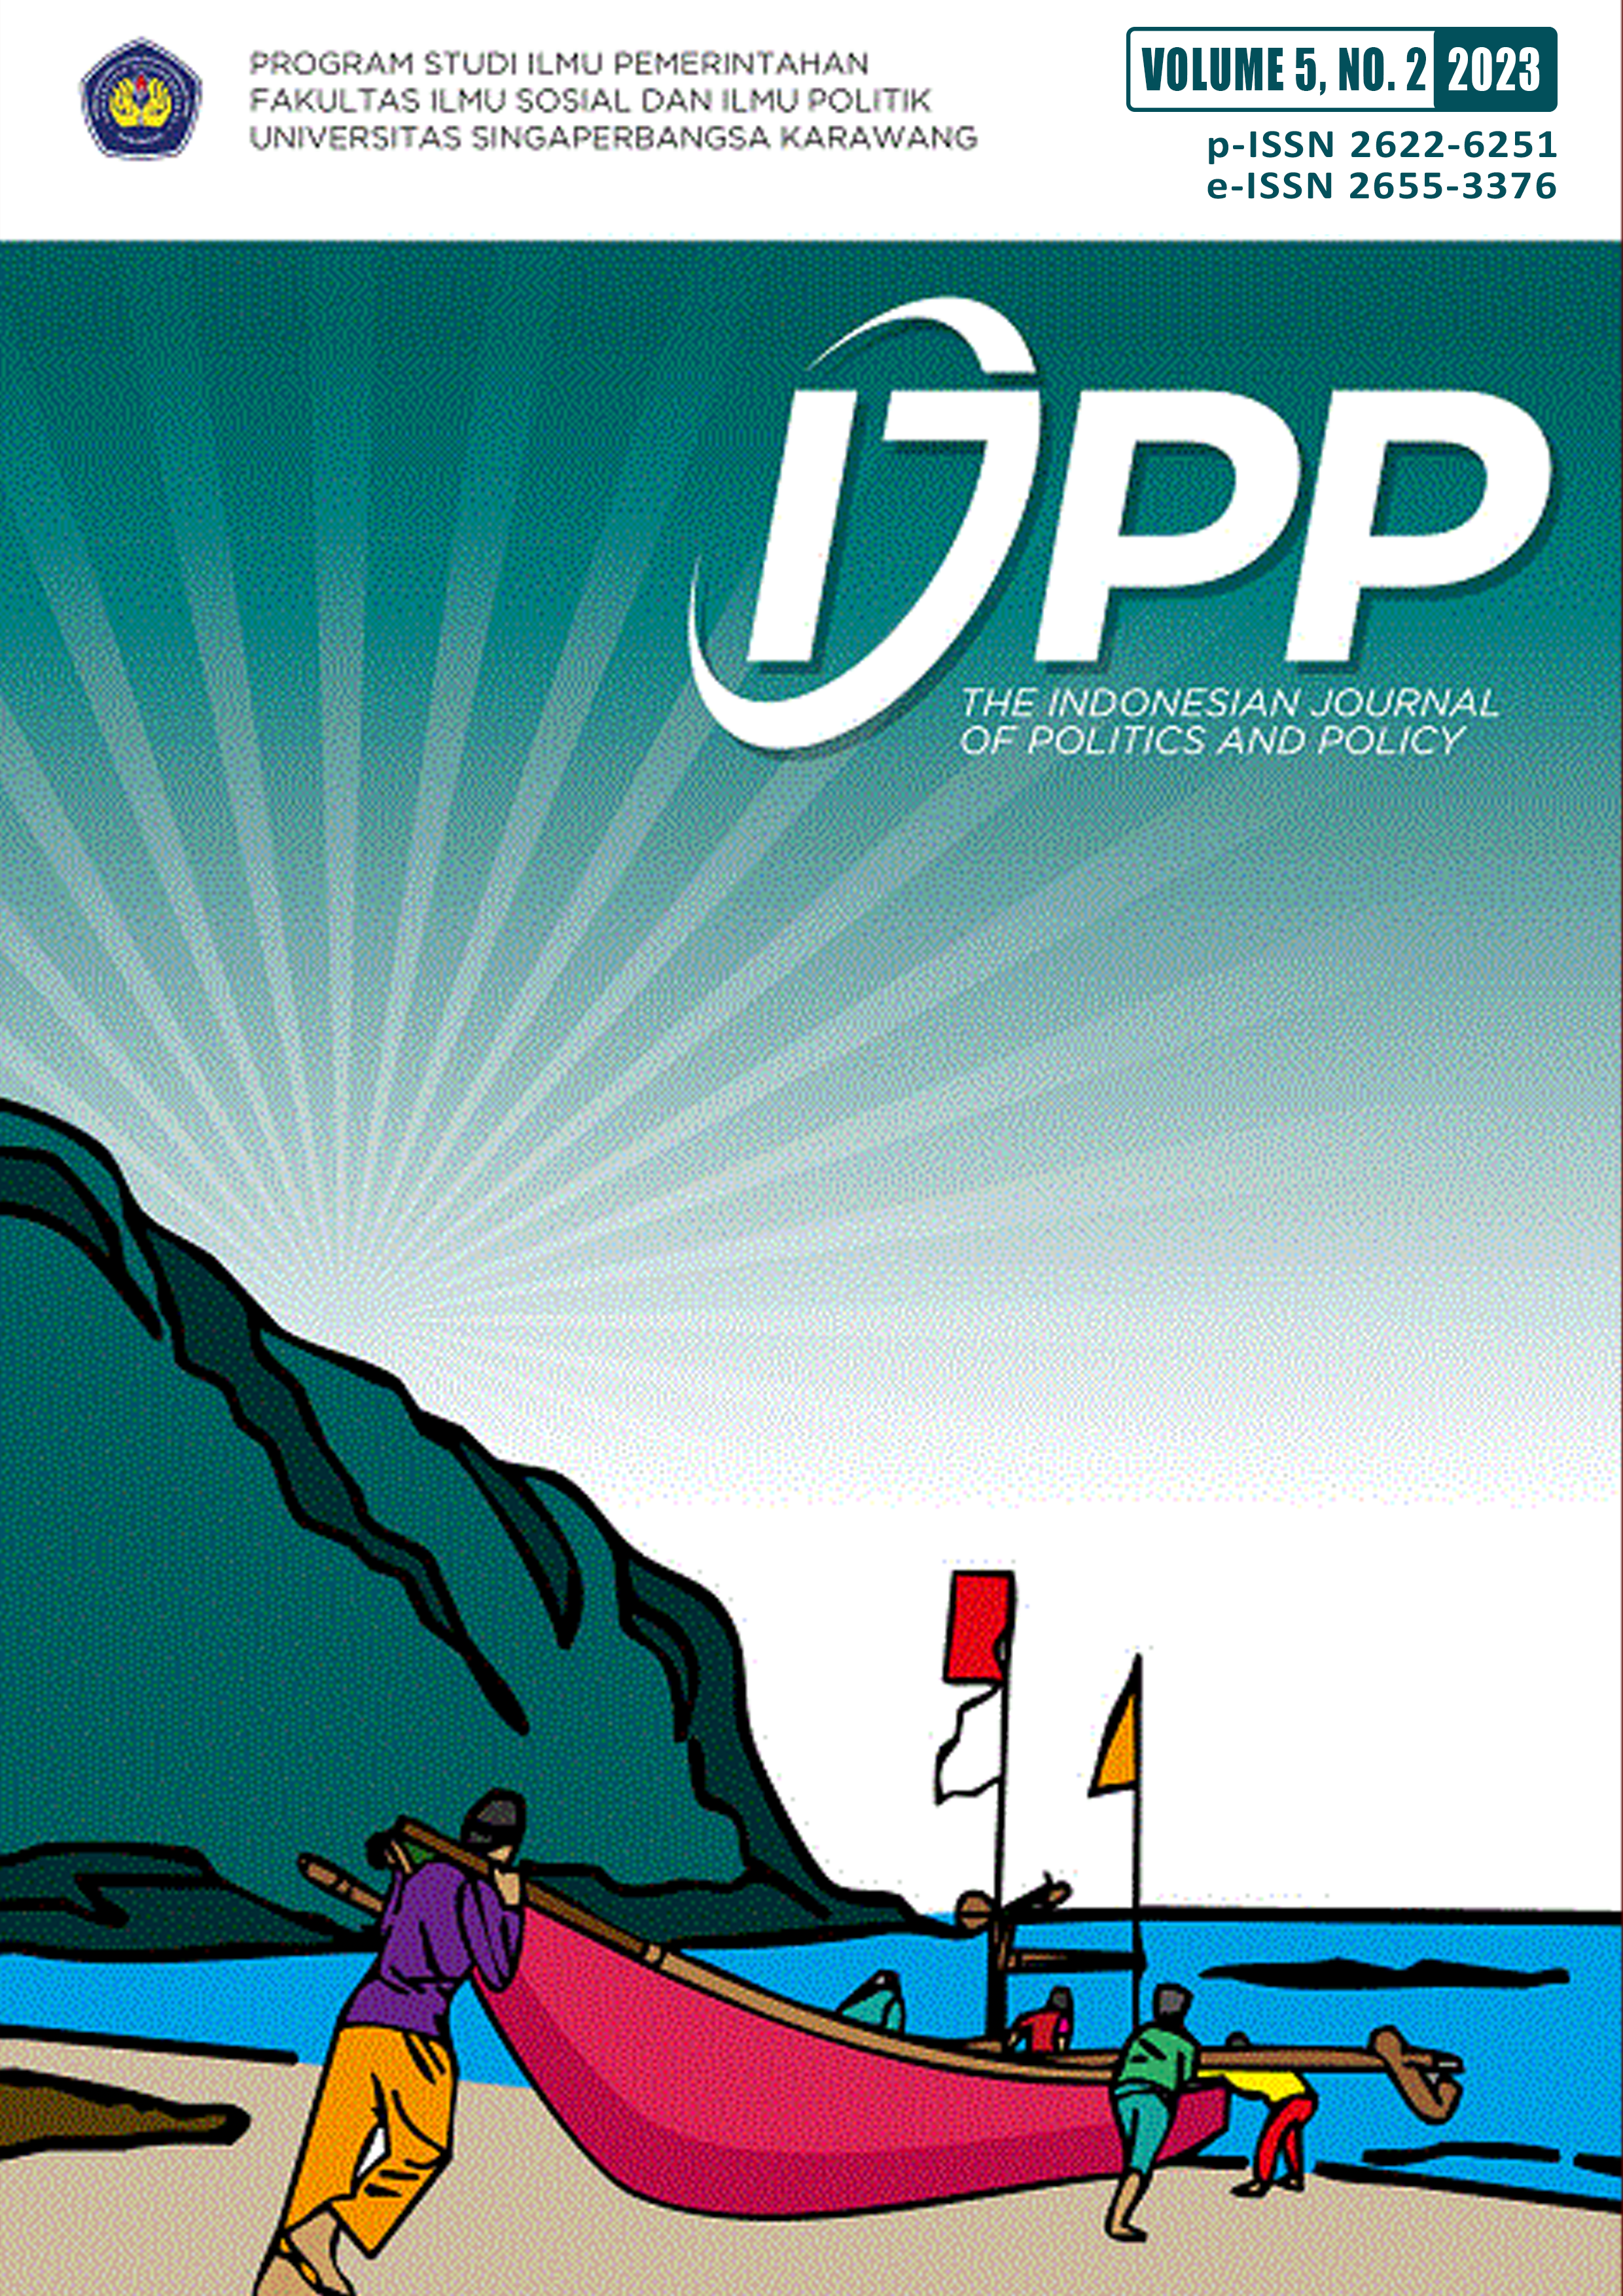 					Lihat Vol 5 No 2 (2023): THE INDONESIAN JOURNAL OF POLITICS AND POLICY
				